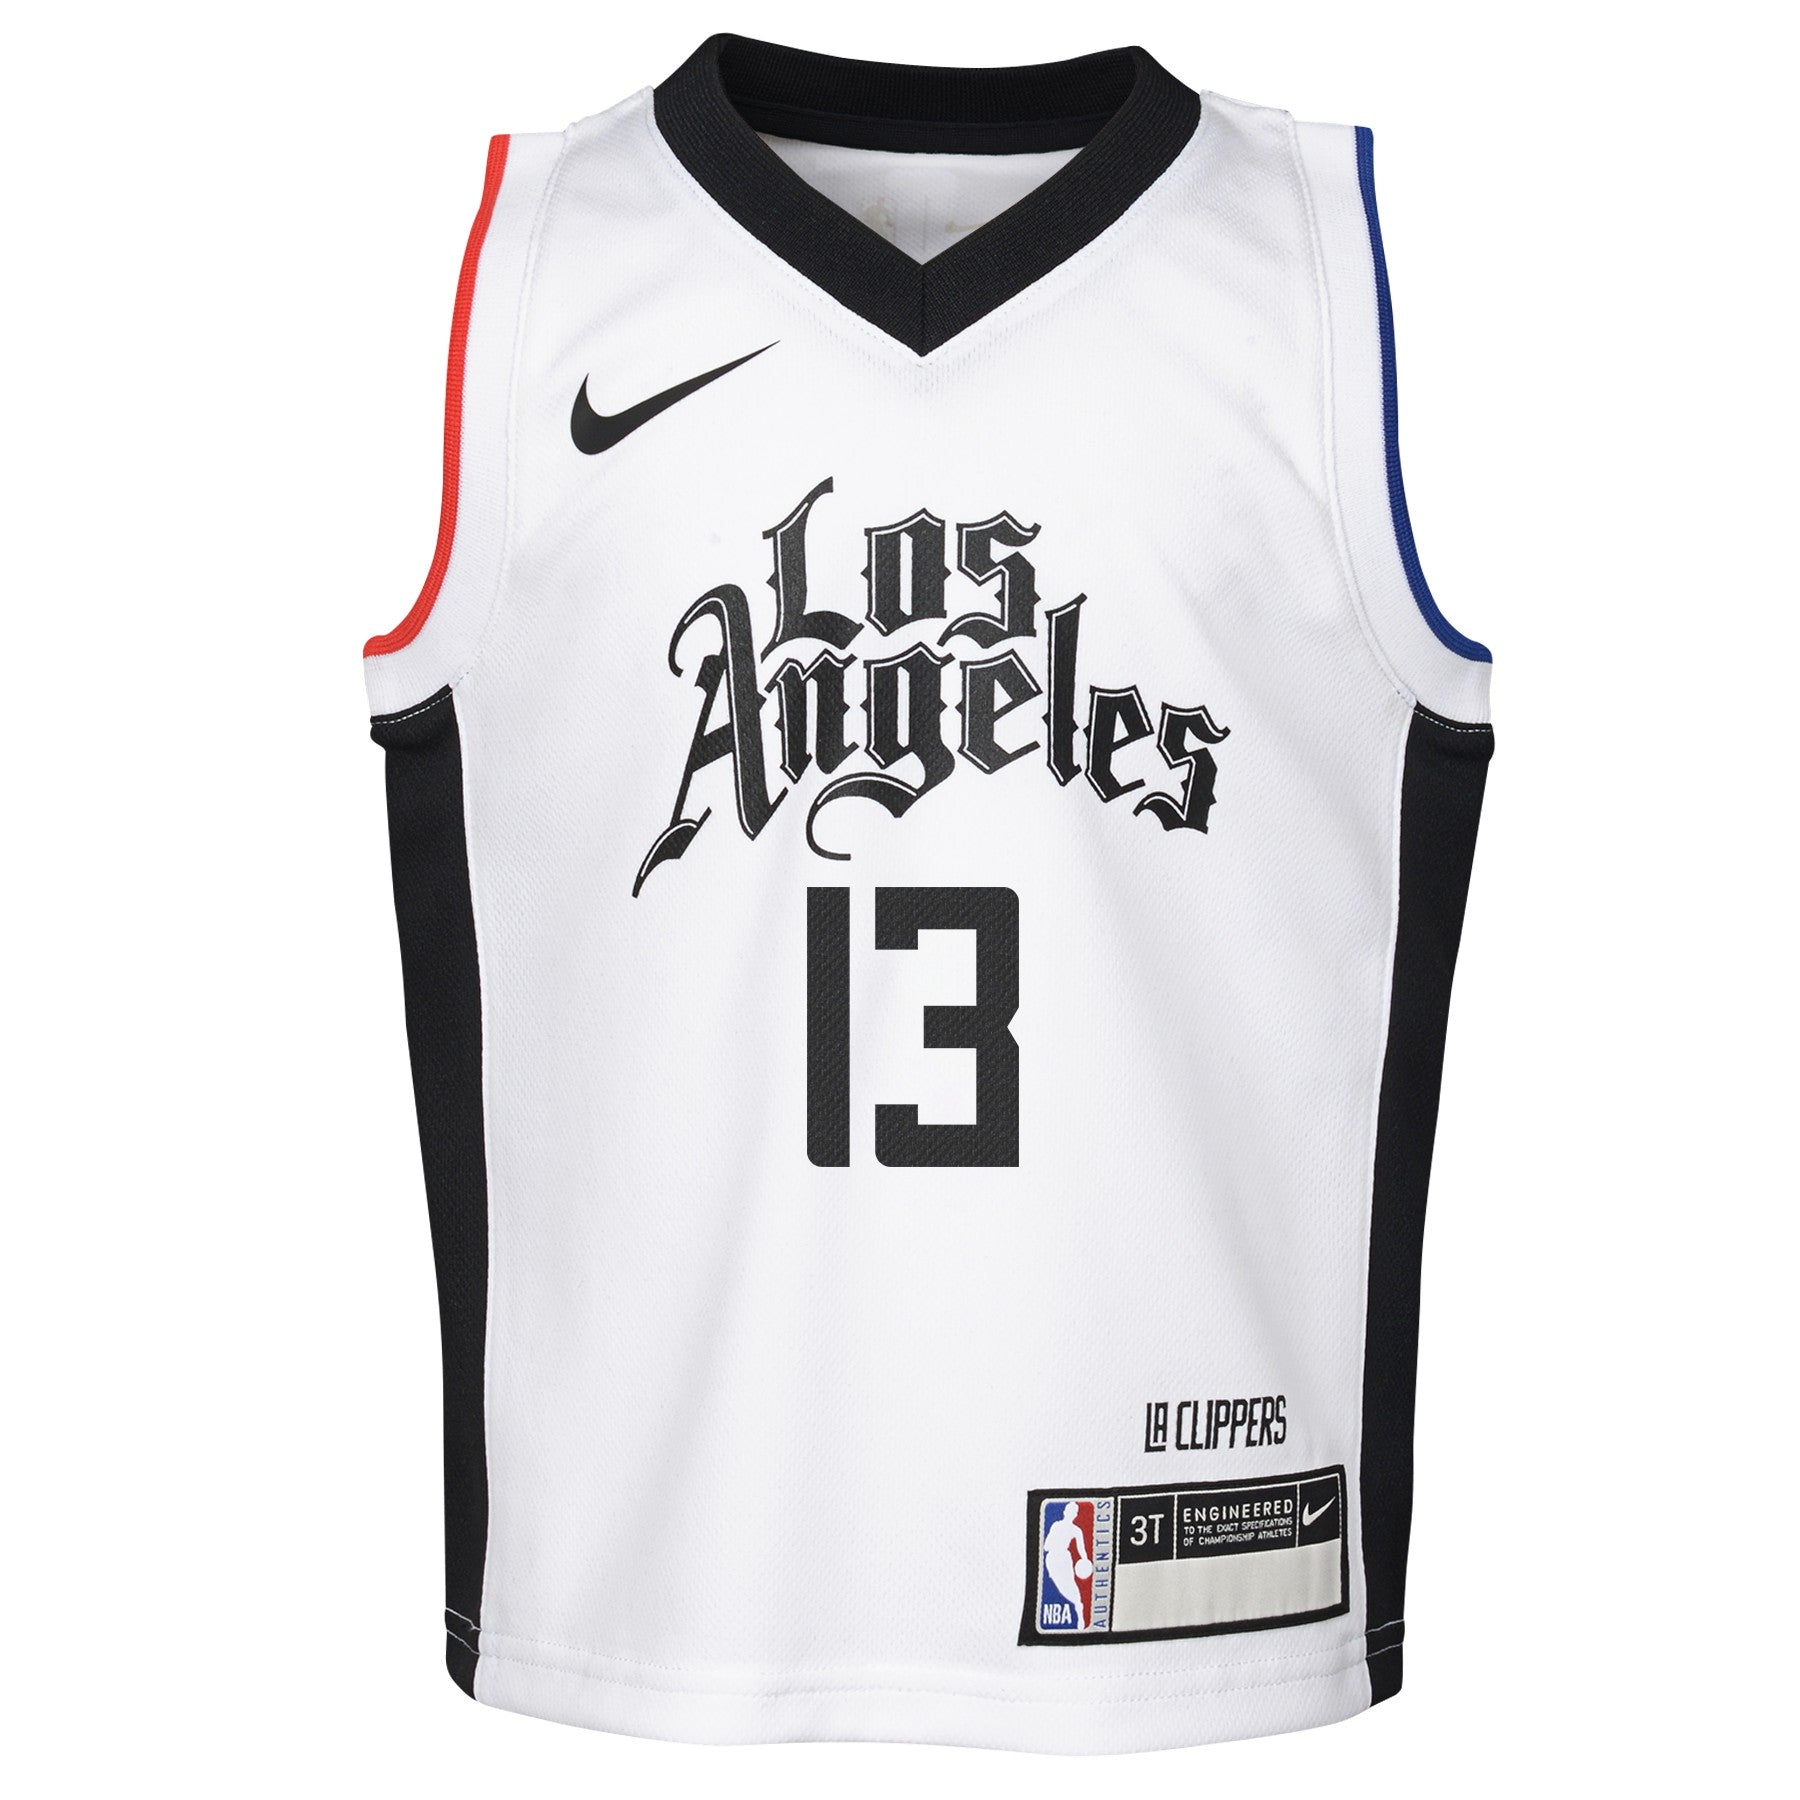 Nike NBA Toddlers Paul George Los Angeles Clippers #13 City